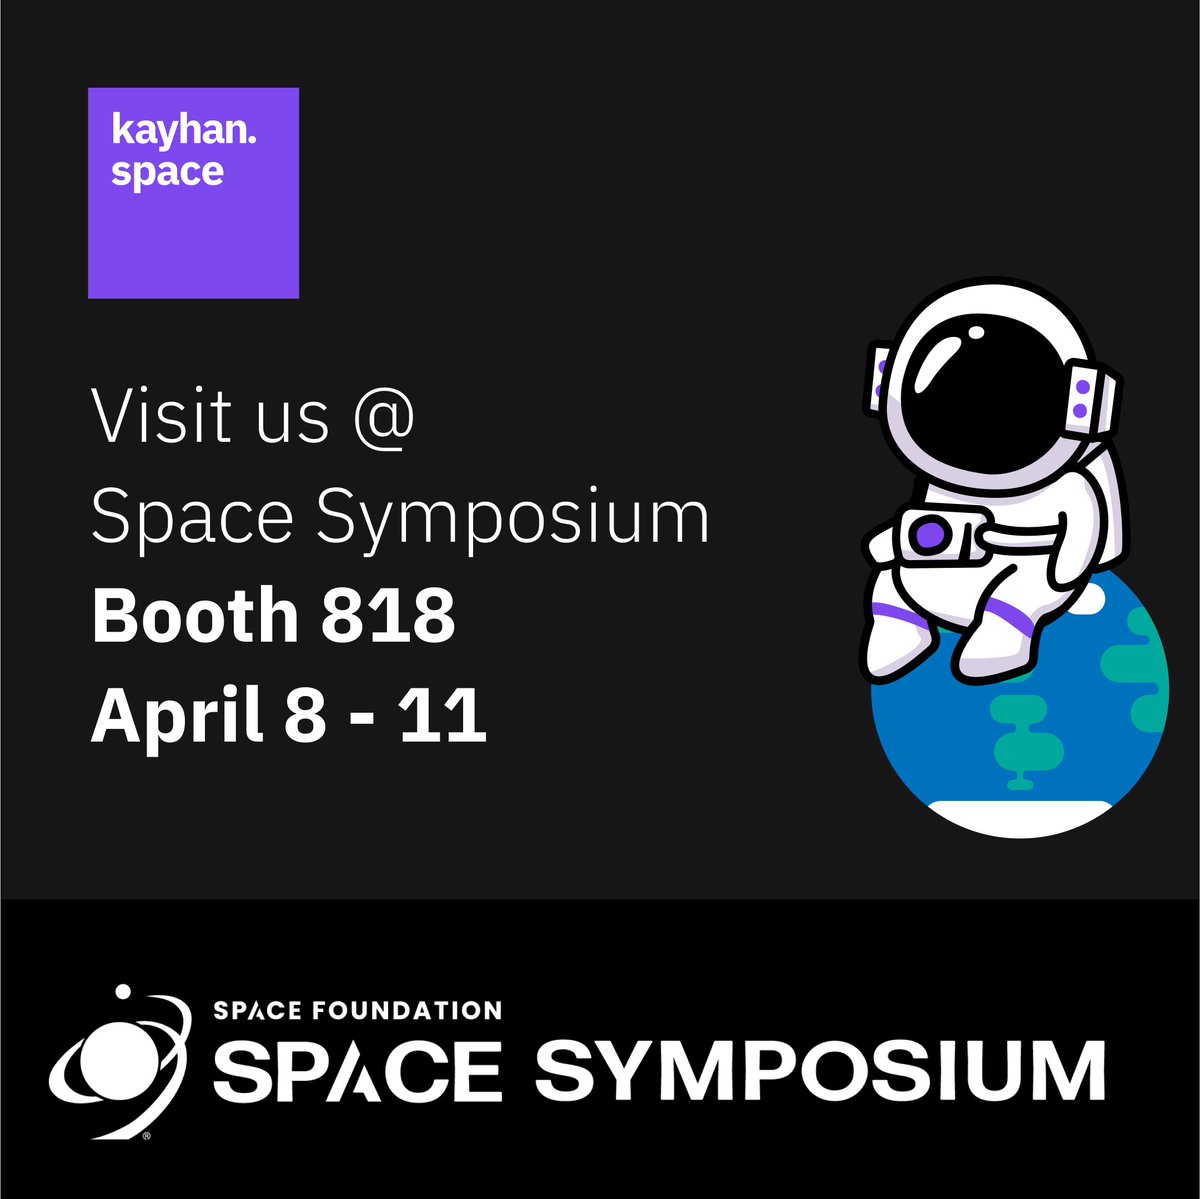 Kayhan Space will be at the 39th #SpaceSymposium hosted by @SpaceFoundation! Discover how Pathfinder™ enables autonomous space traffic coordination for satellite operators around the globe next week at Booth 818 Request a meeting with our team at kayhanspace.typeform.com/nss2024 🛰️